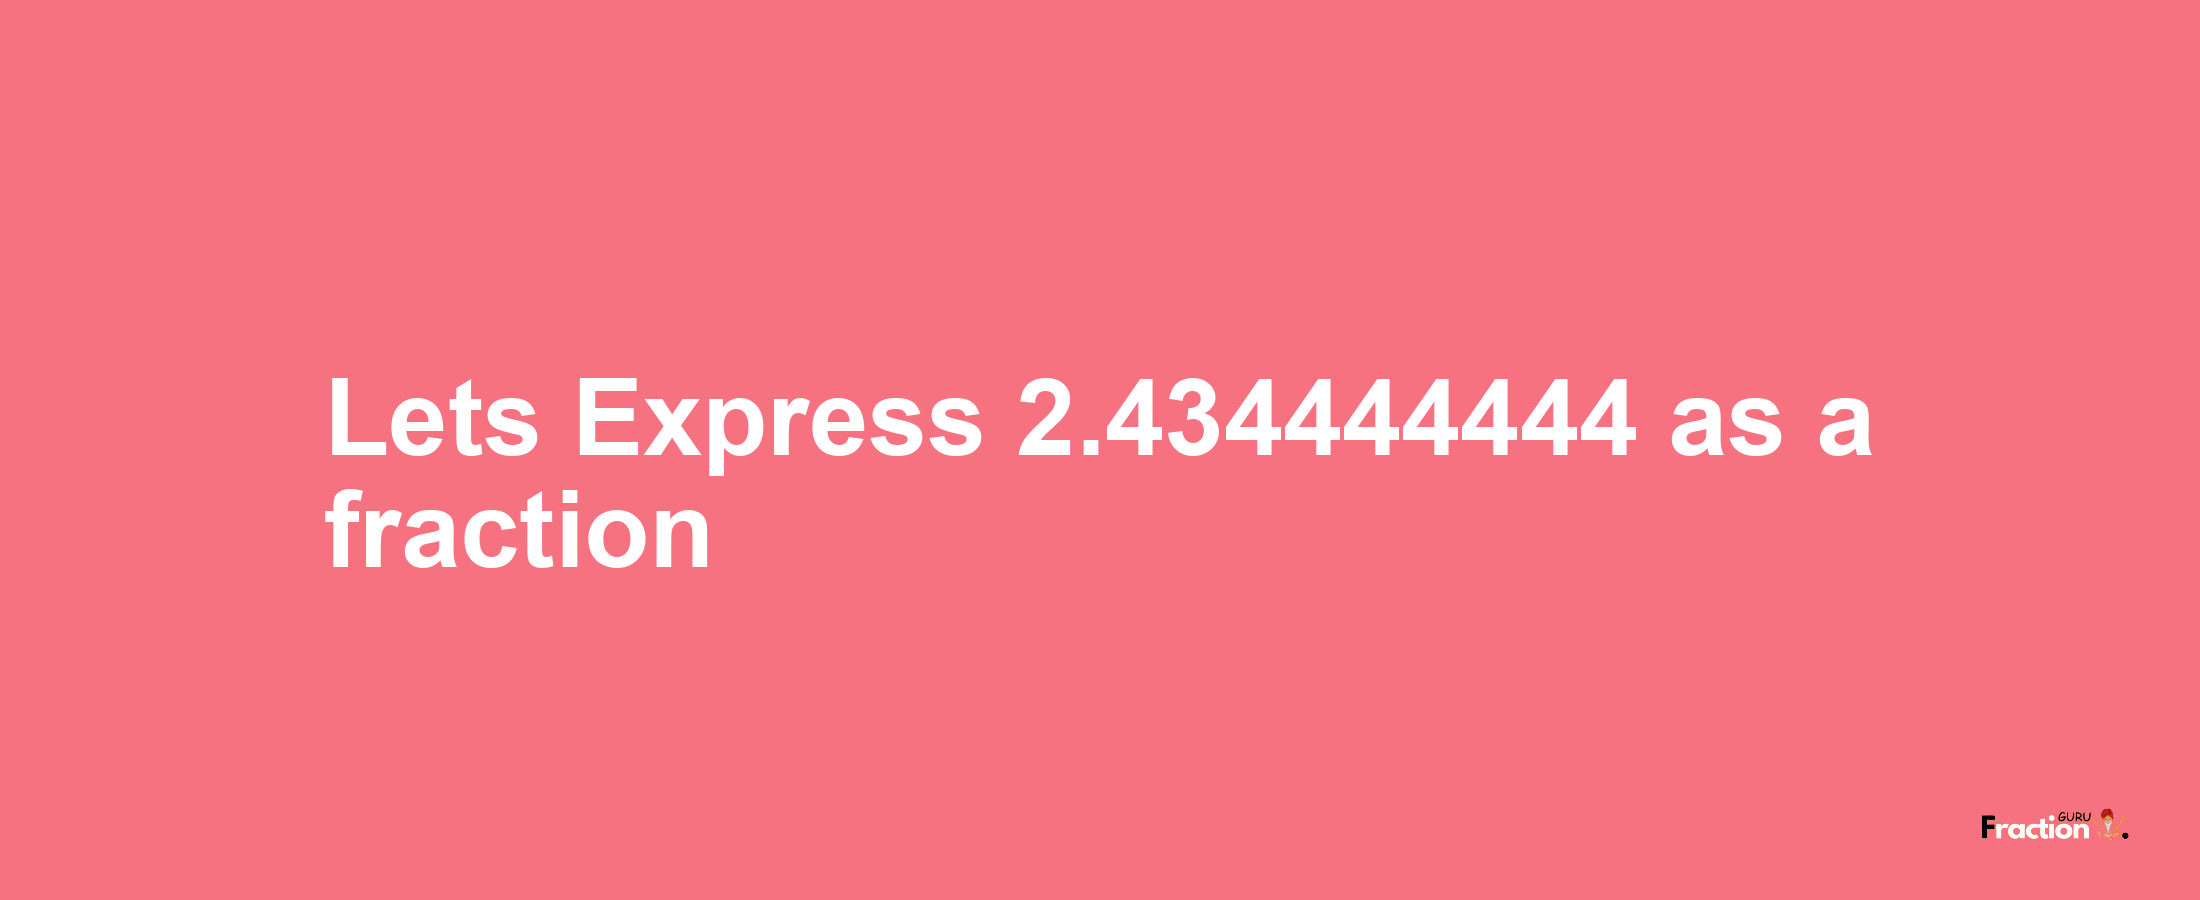 Lets Express 2.434444444 as afraction